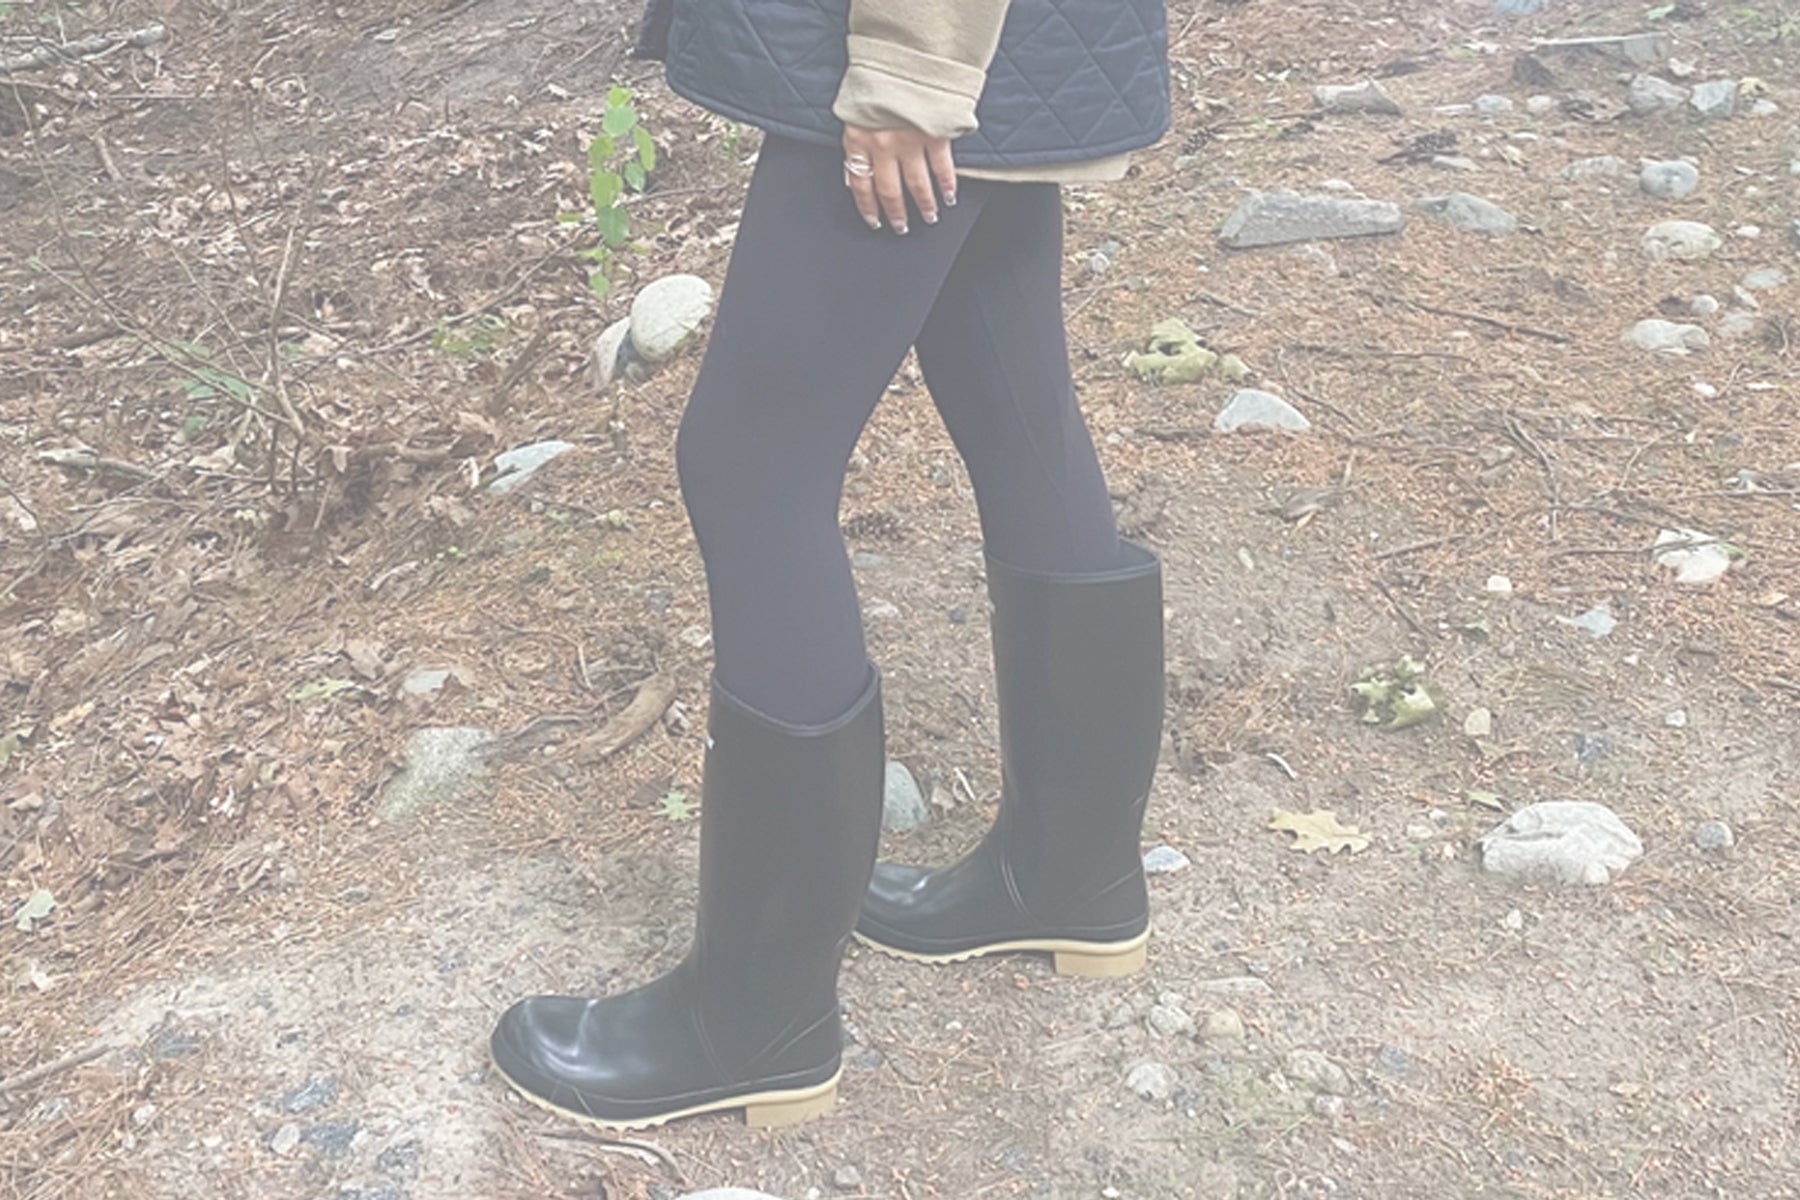 Real-World Tested™ PRIME: A Canadian Made Women's Rubber Boot